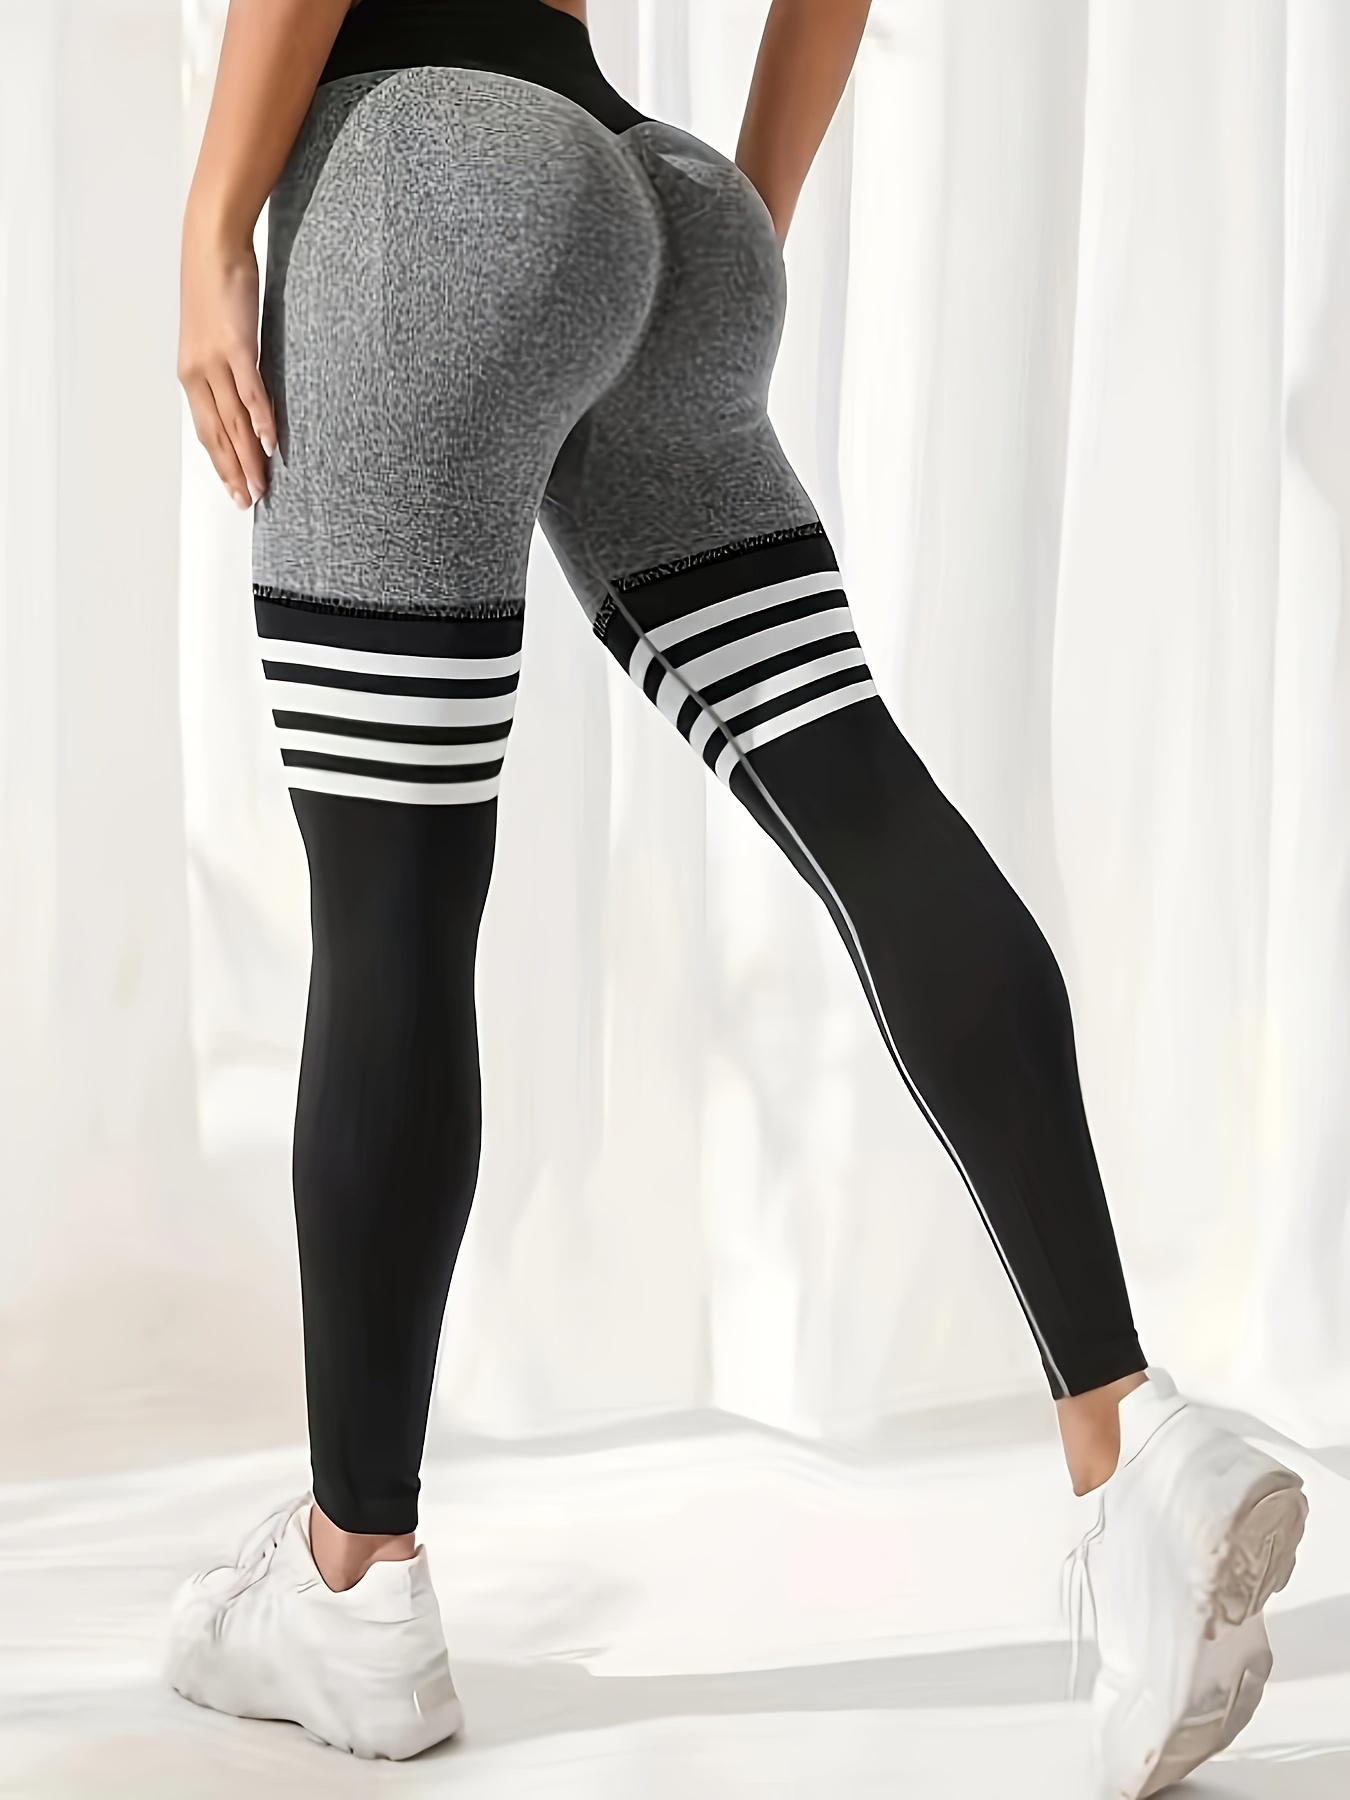 White Thigh High Sock Leggings | Workout Leggings | FitGal Activewear